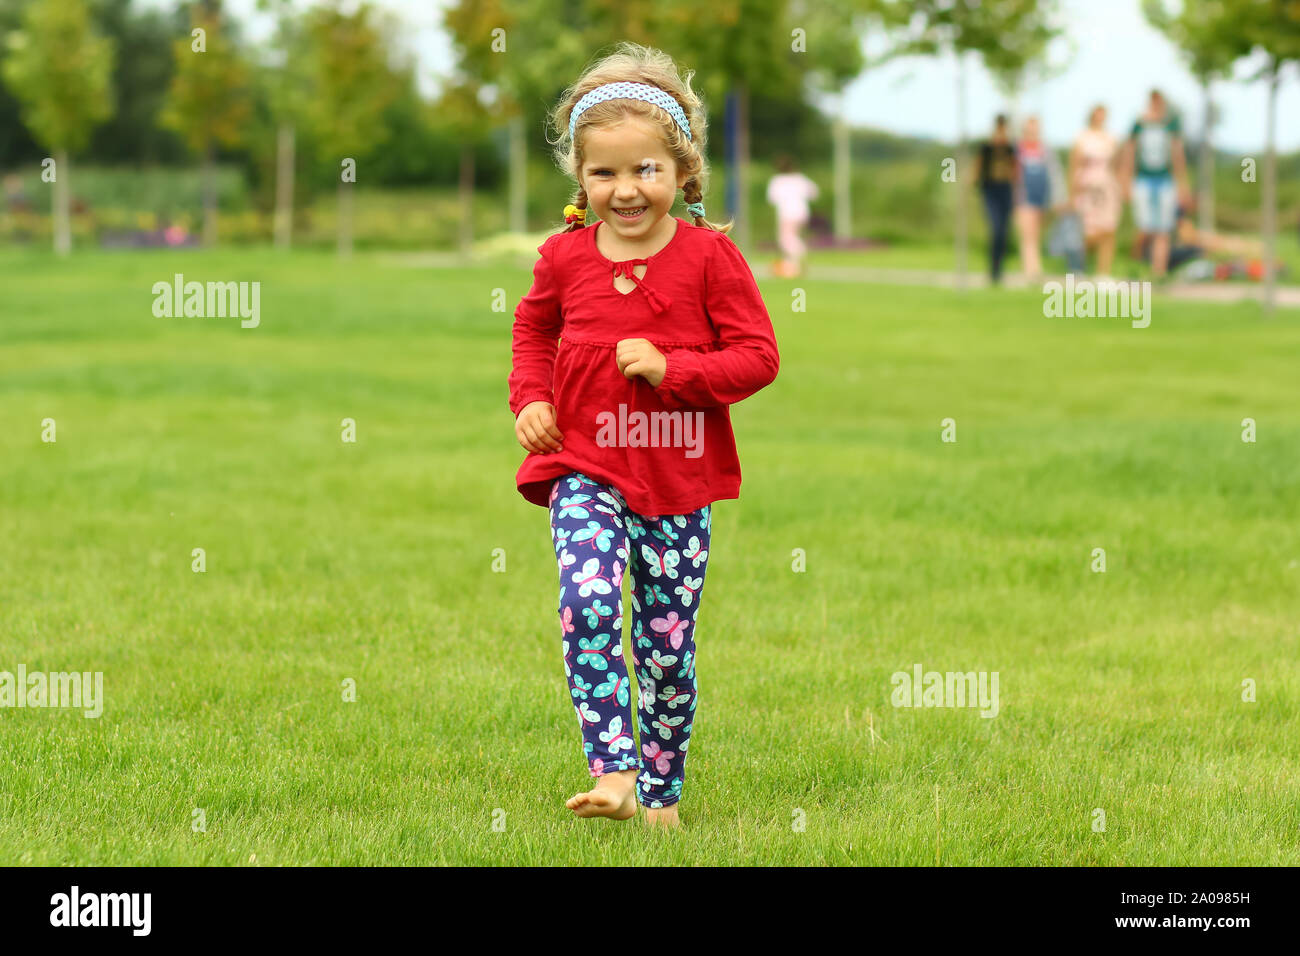 Toddler caucasian girl running barefoot on the lawn outdoors Stock Photo